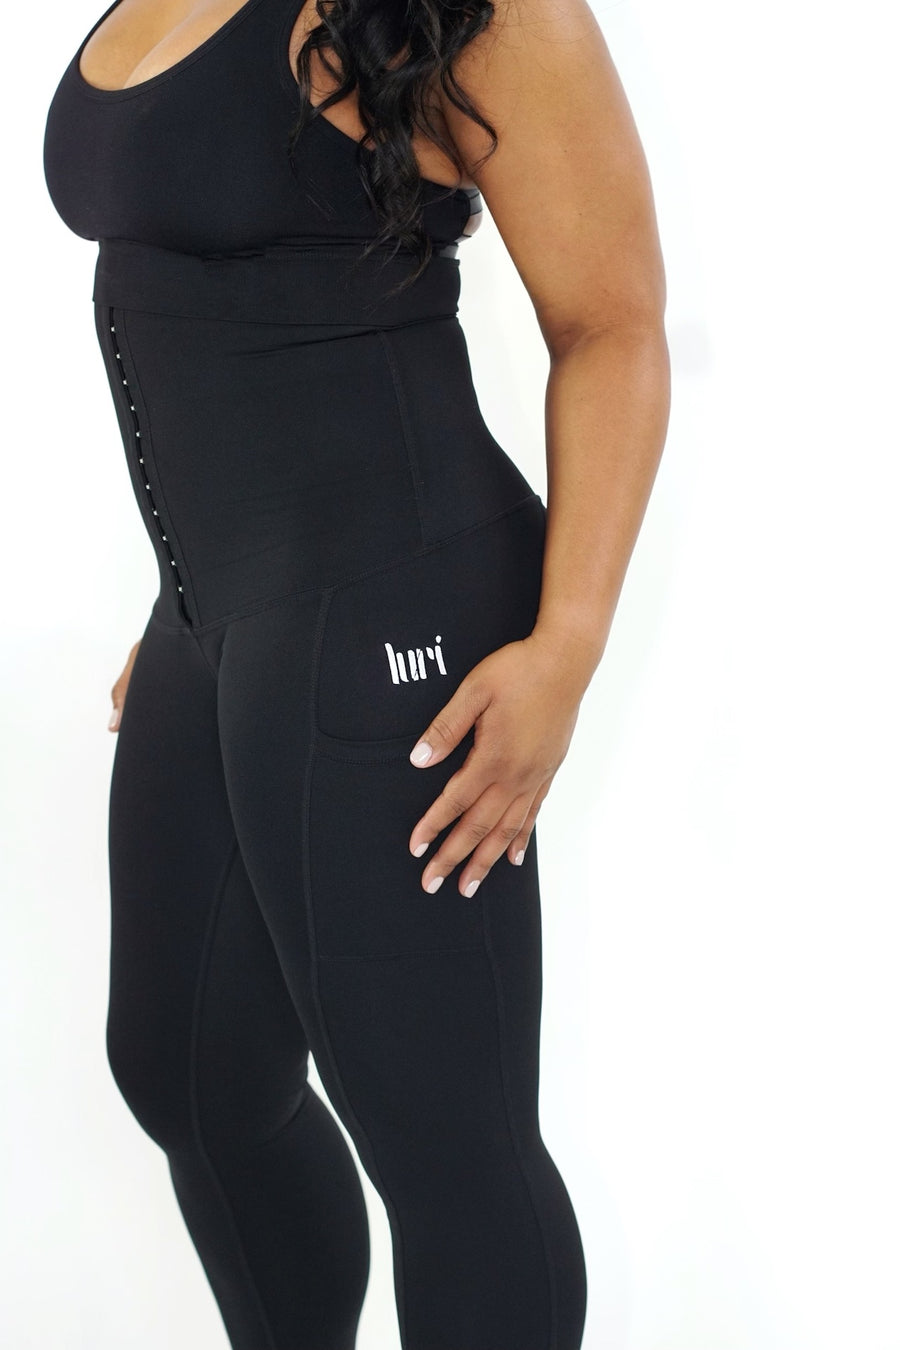 "Luxe" High Waisted Compression Leggings - Luri post surgical garments